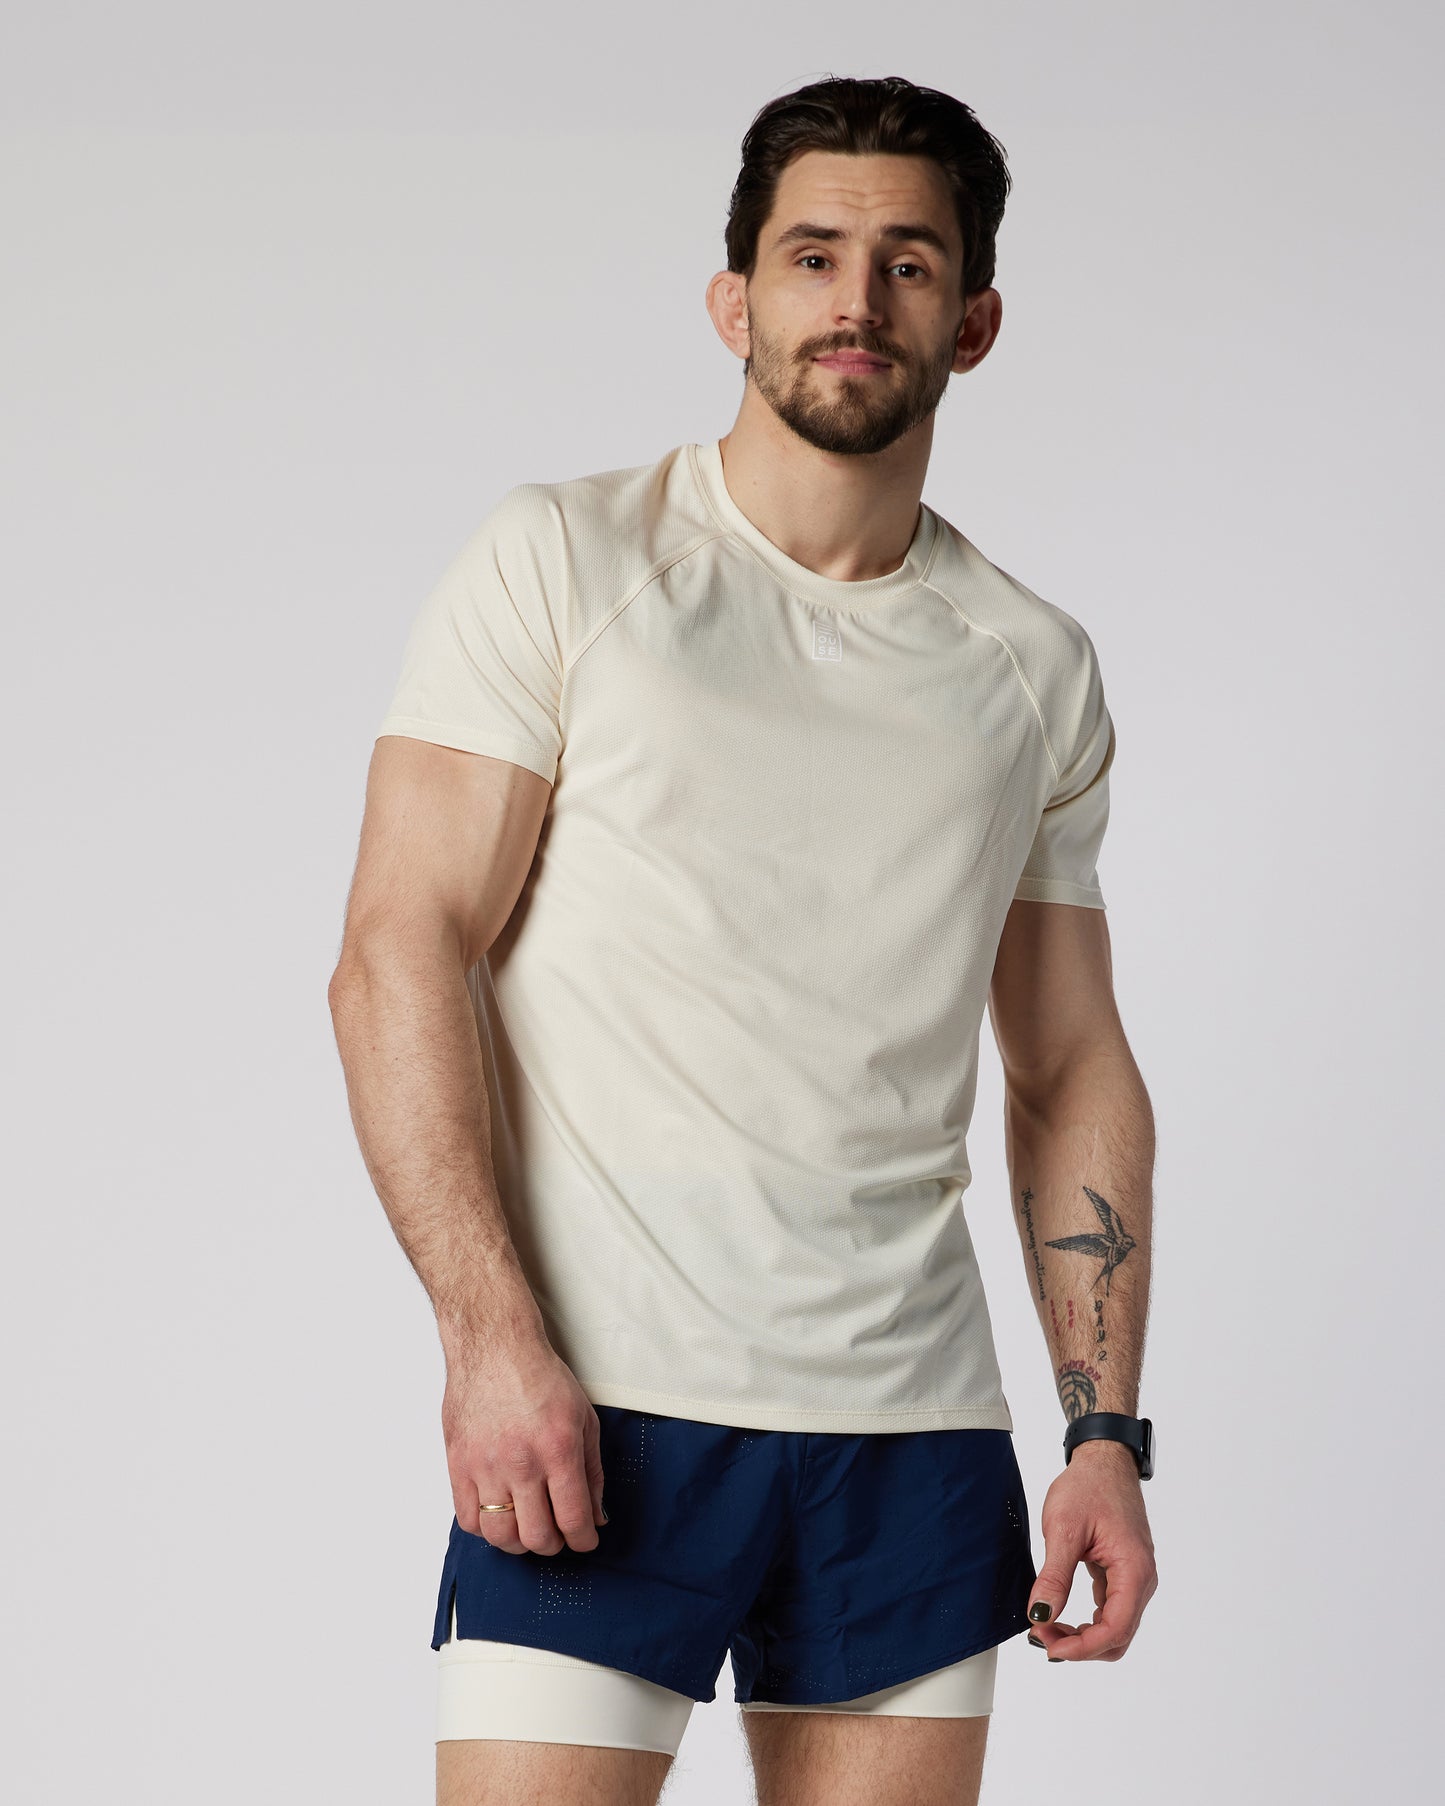 Mens off white athletic t-shirt